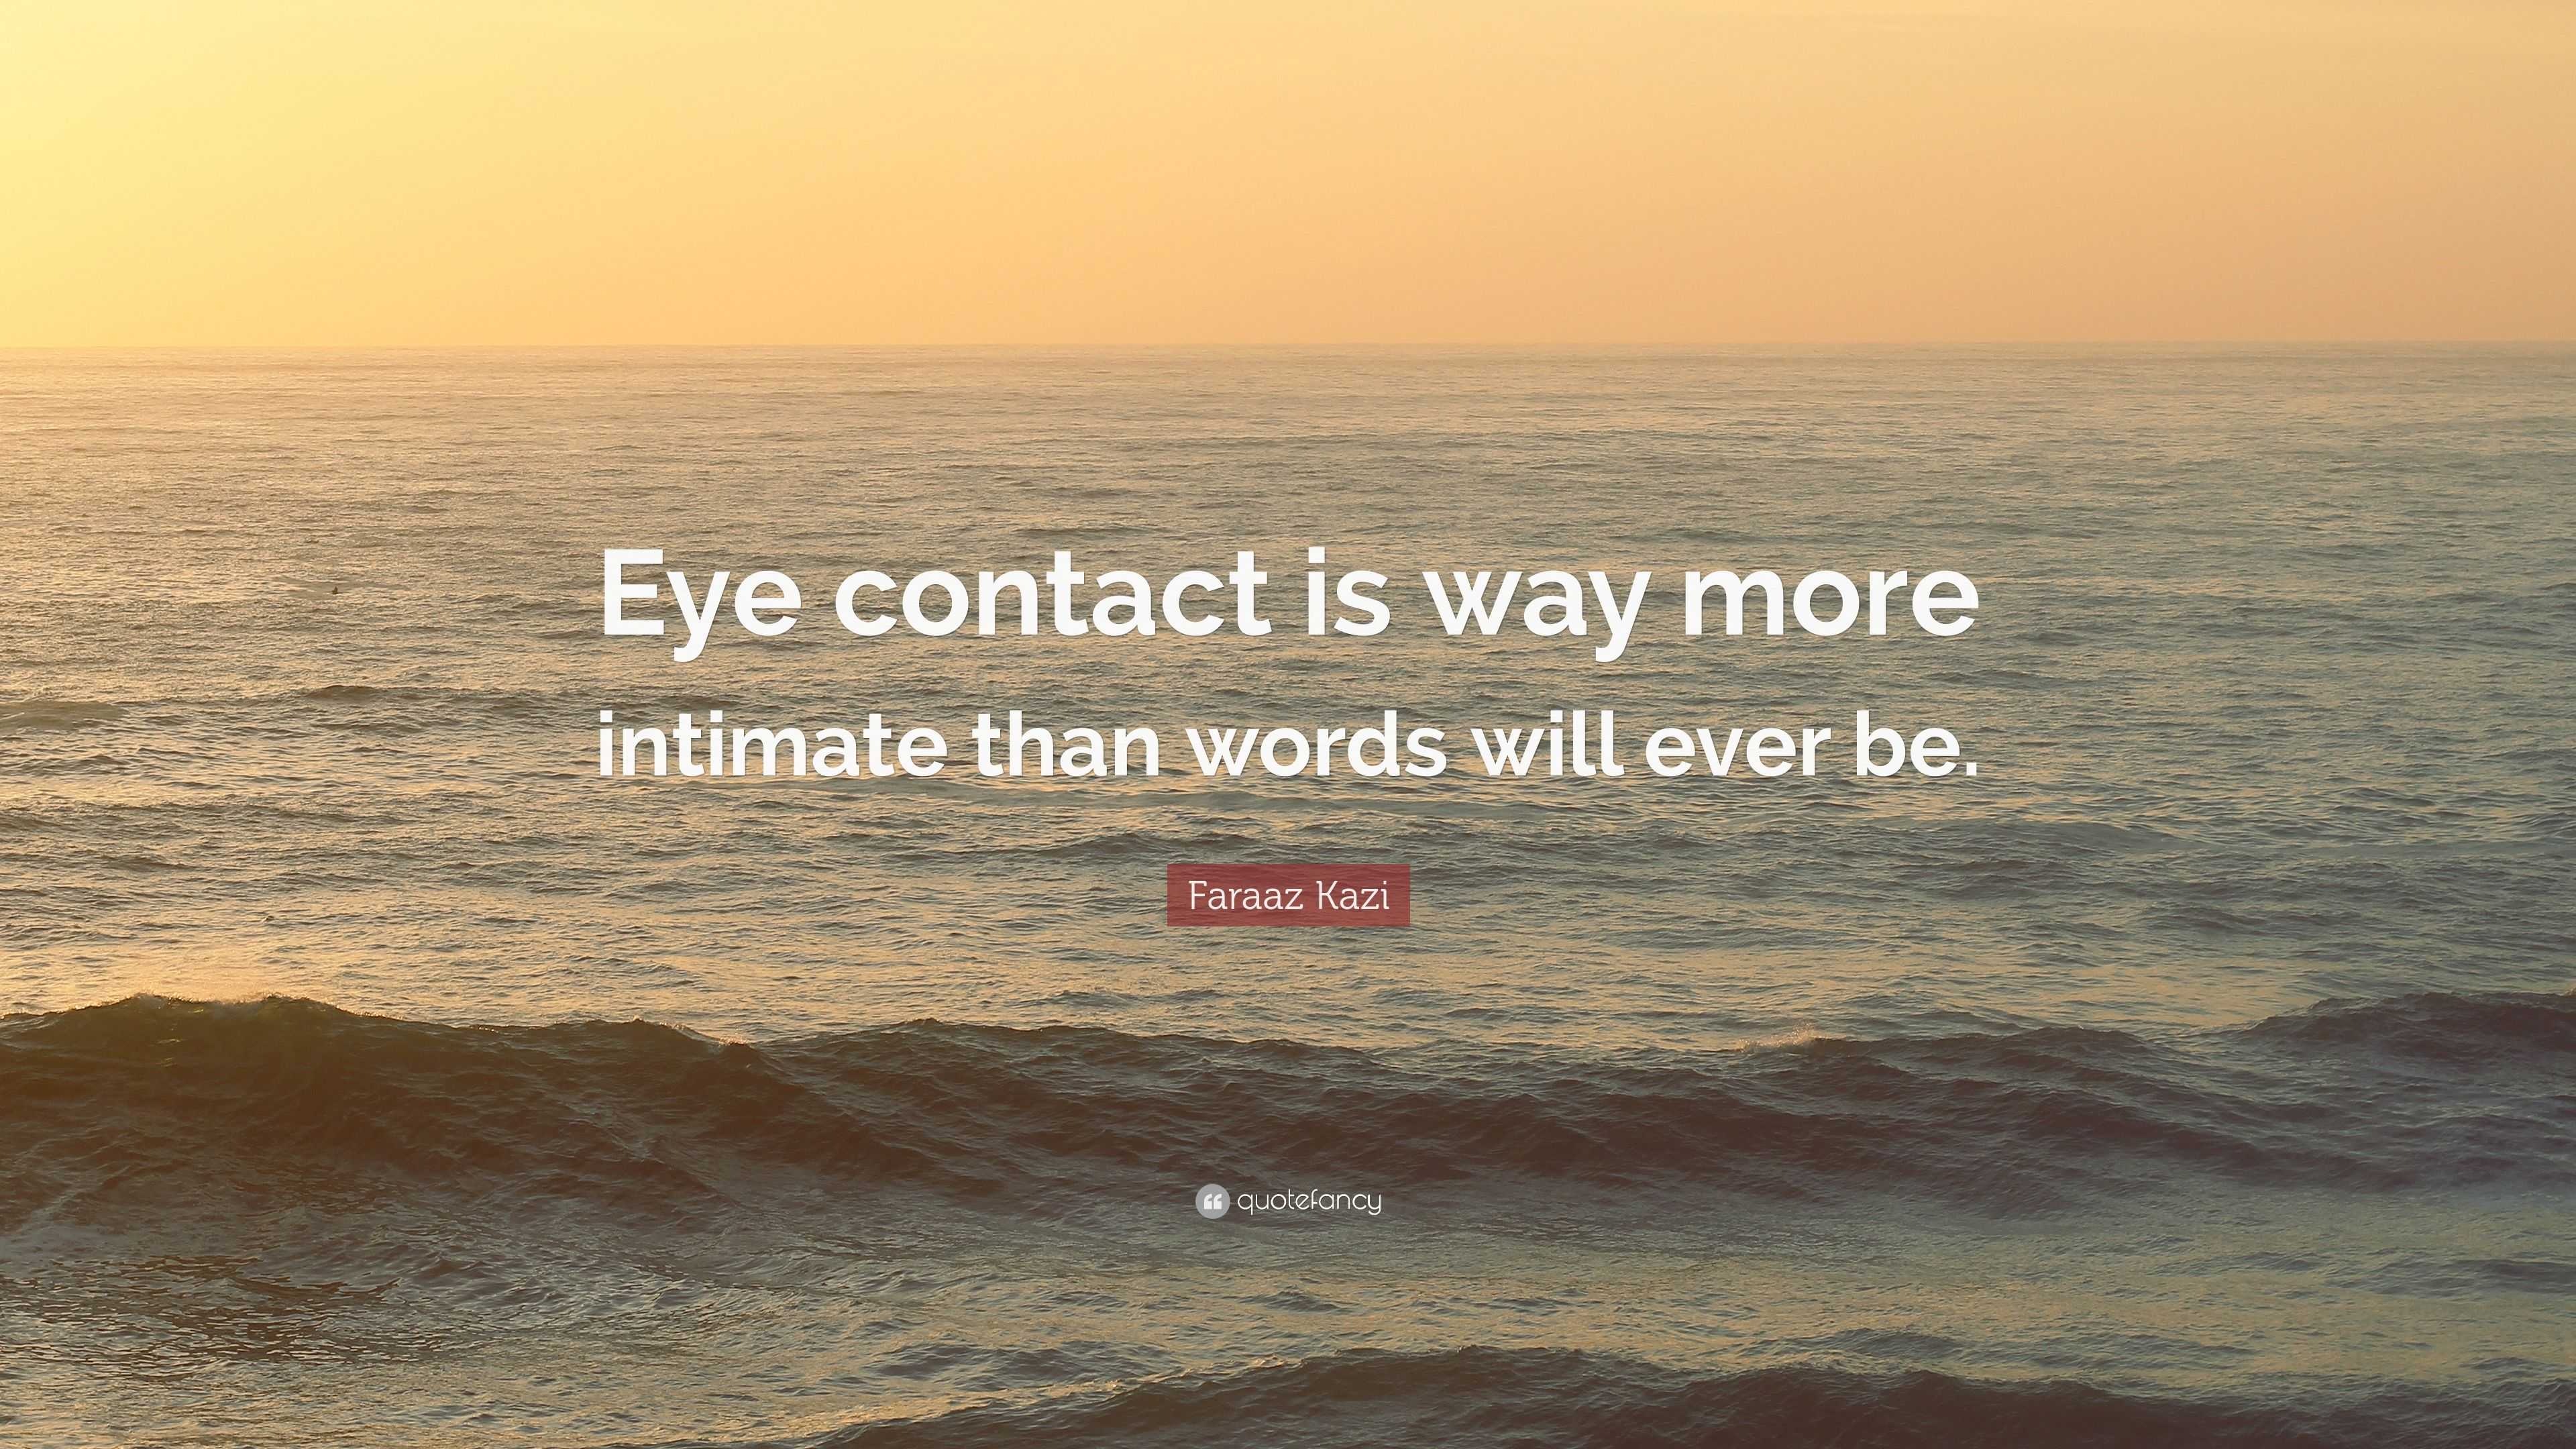 Faraaz Kazi Quote “eye Contact Is Way More Intimate Than Words Will Ever Be ”